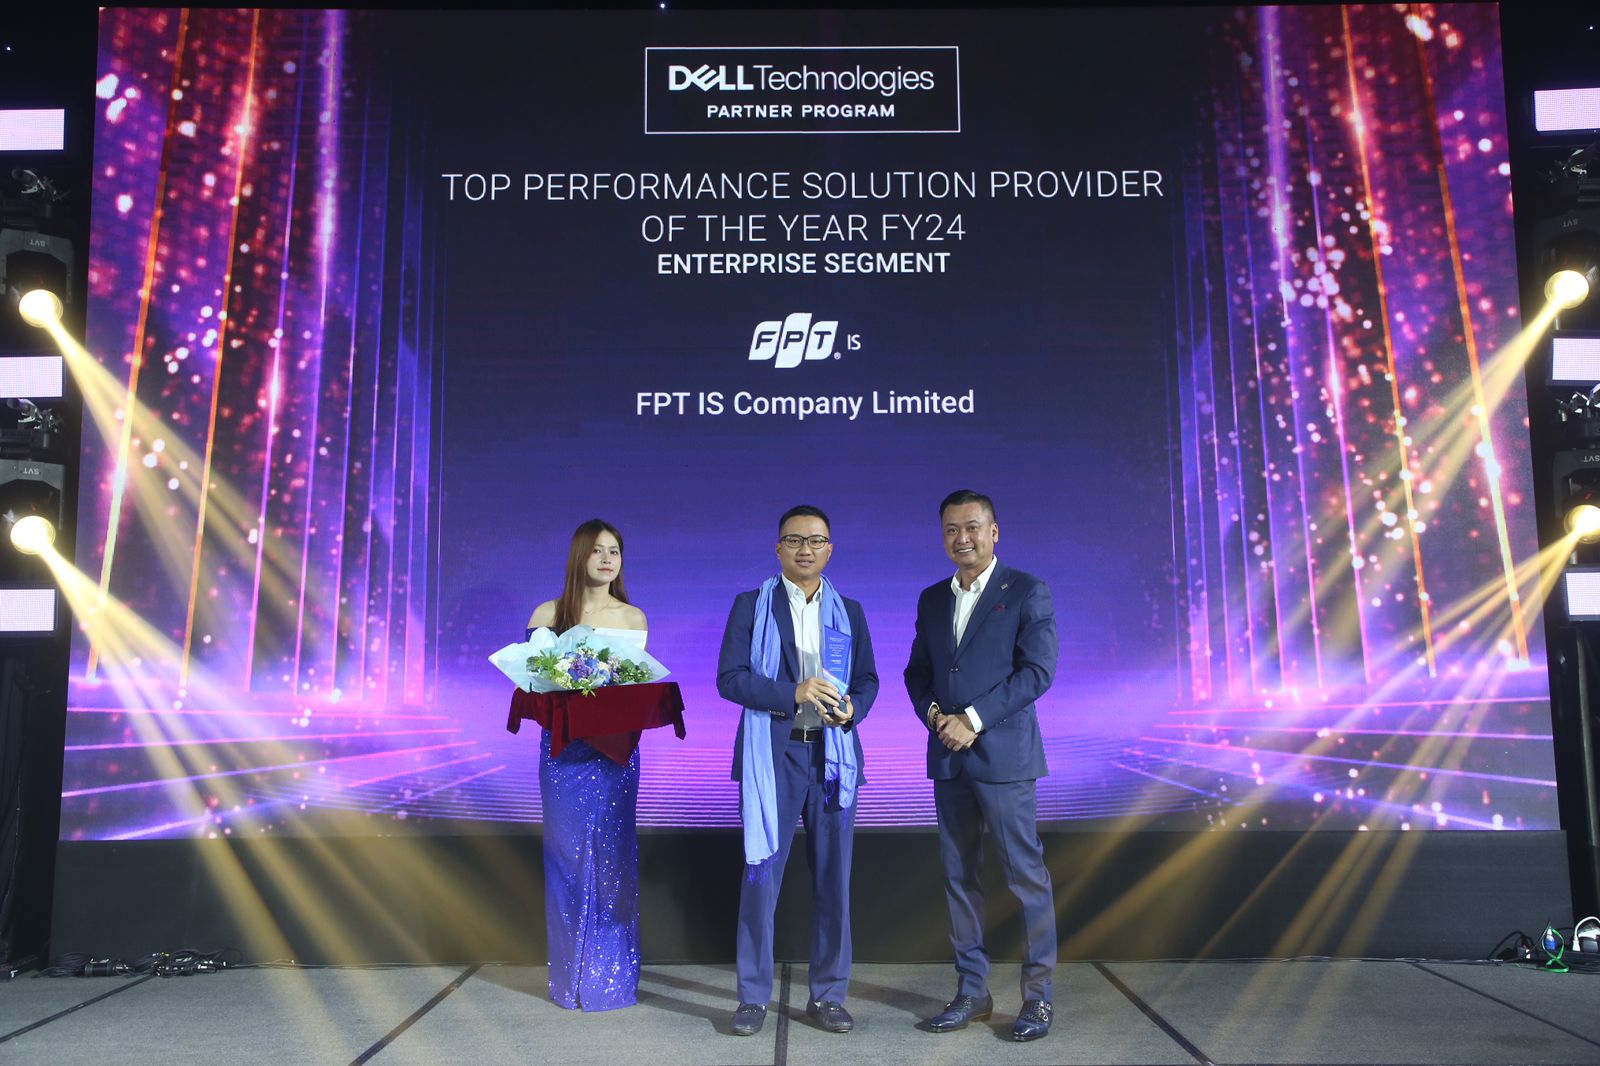 Dell Technologies Top Performance Solution Provider of the Year FY24 – Enterprise Segment category